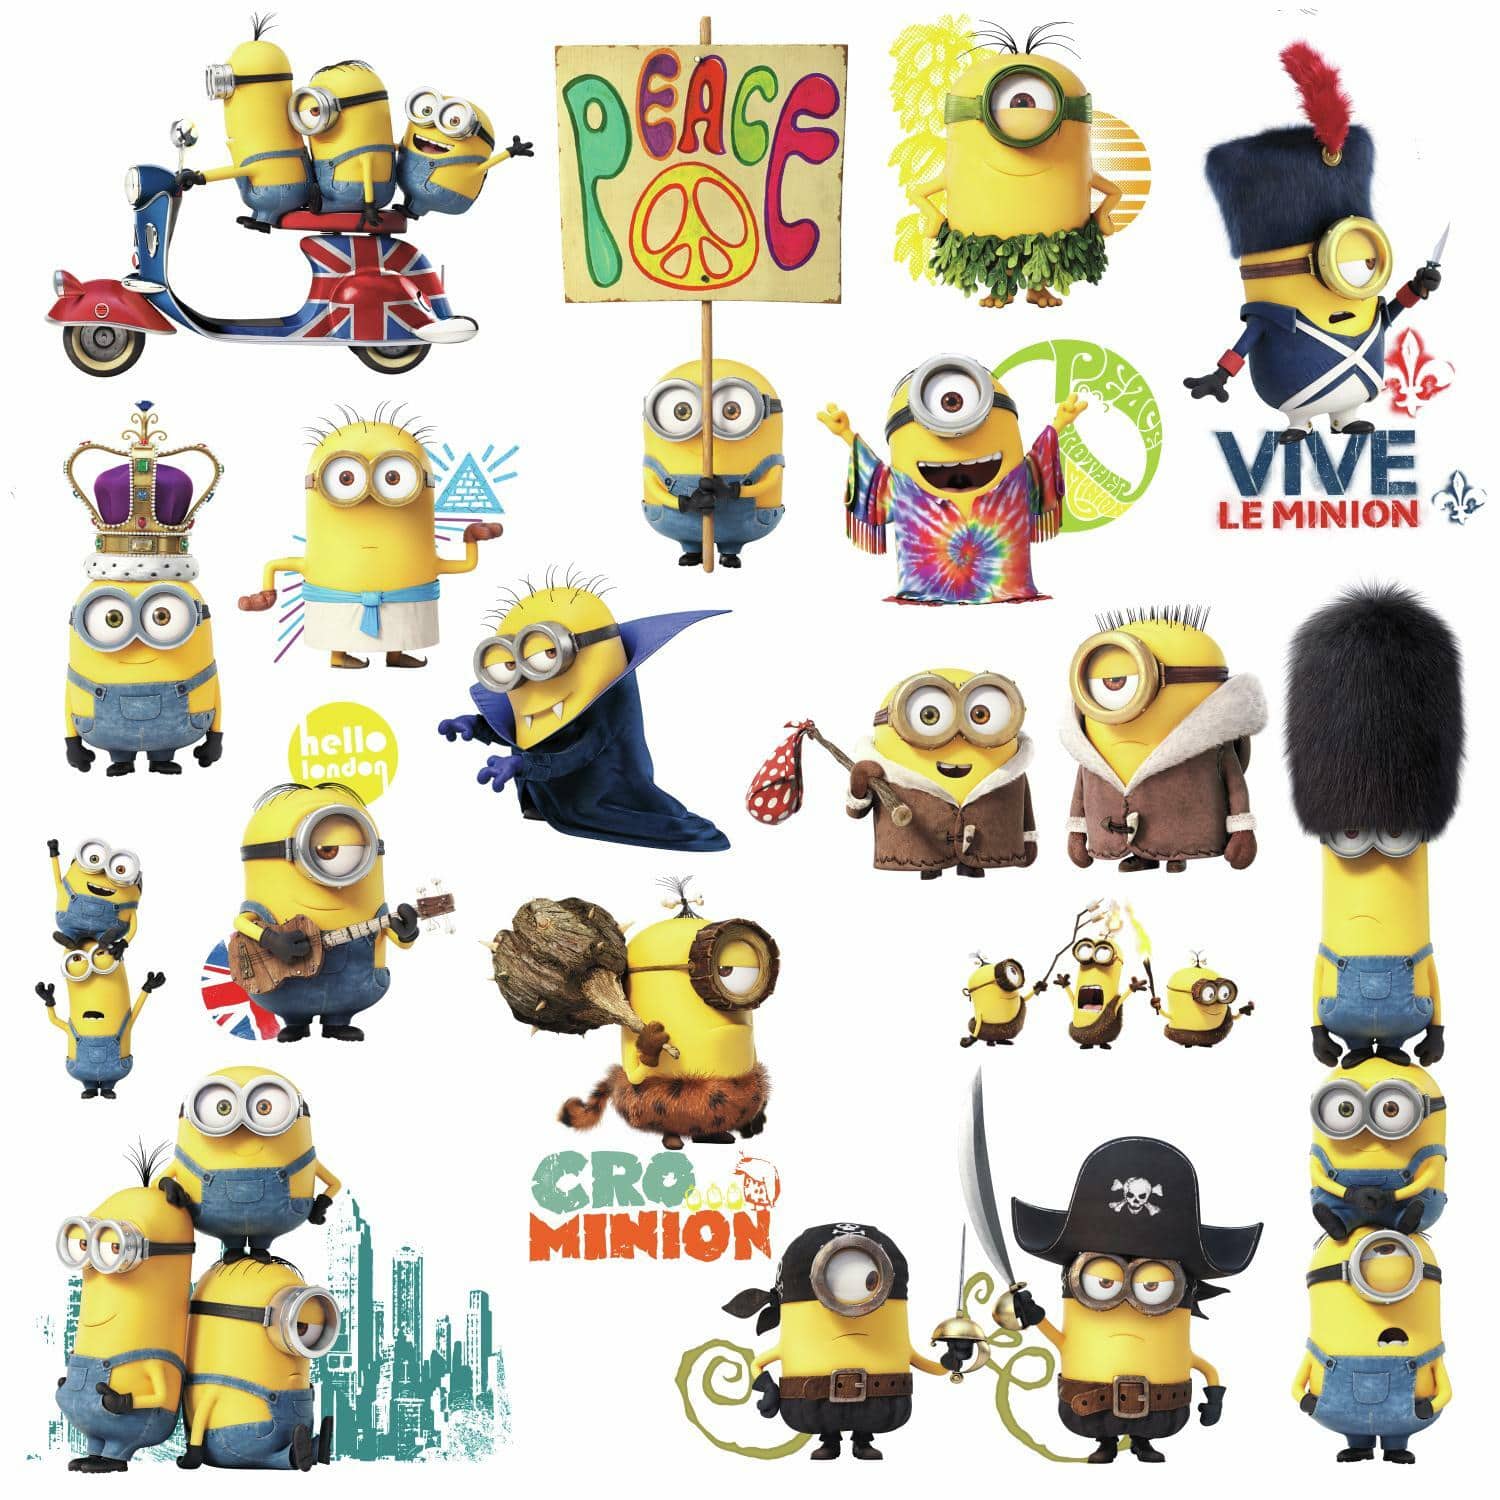 RoomMates Minions The Movie Peel & Stick Wall Decals